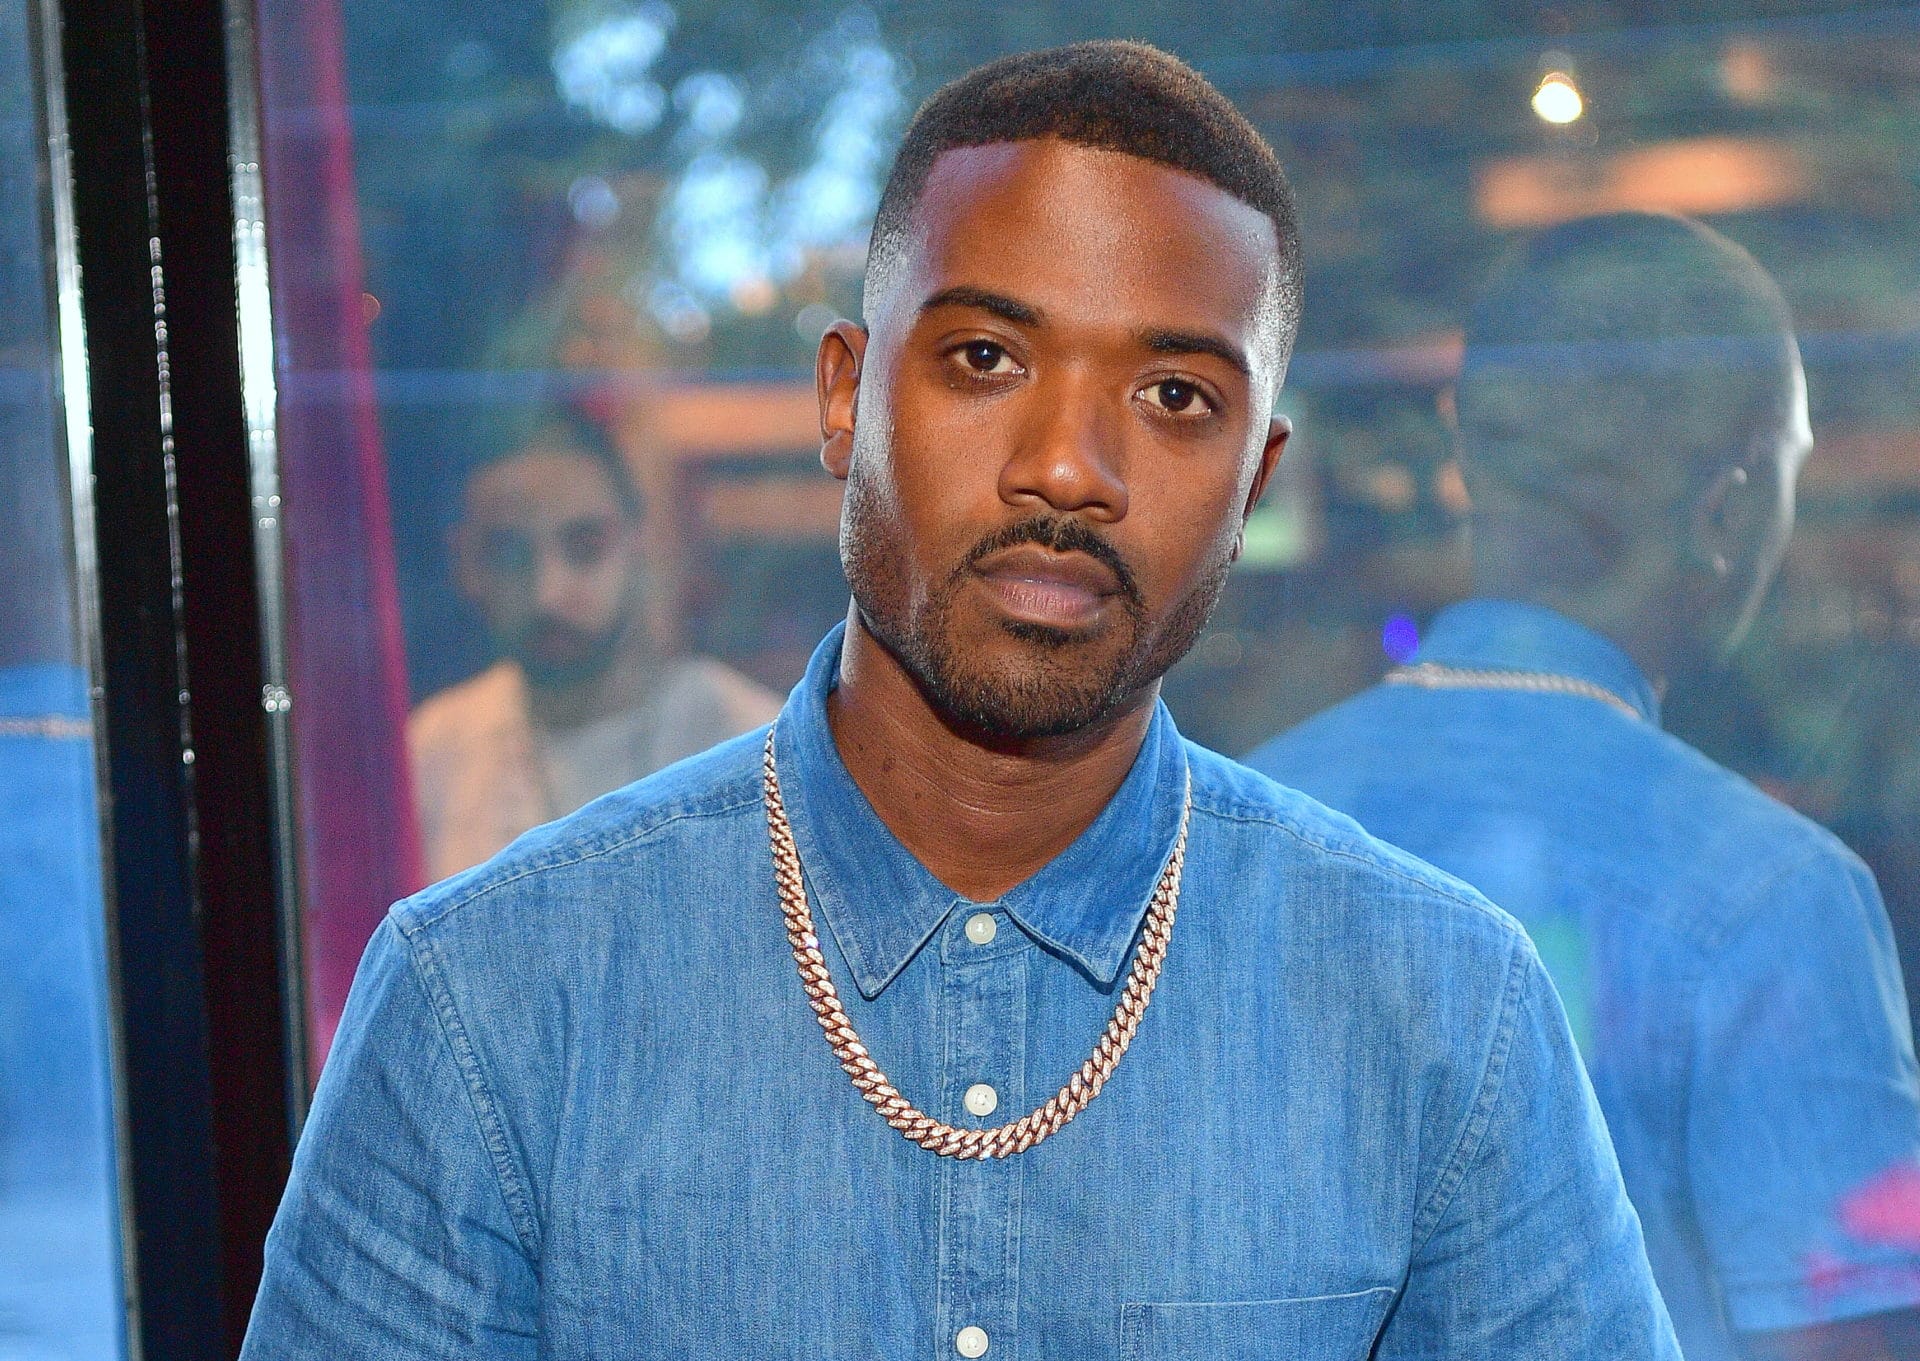 From Reading Glasses To Earbuds: Here's A Few More Products From Ray J's Budding Empire